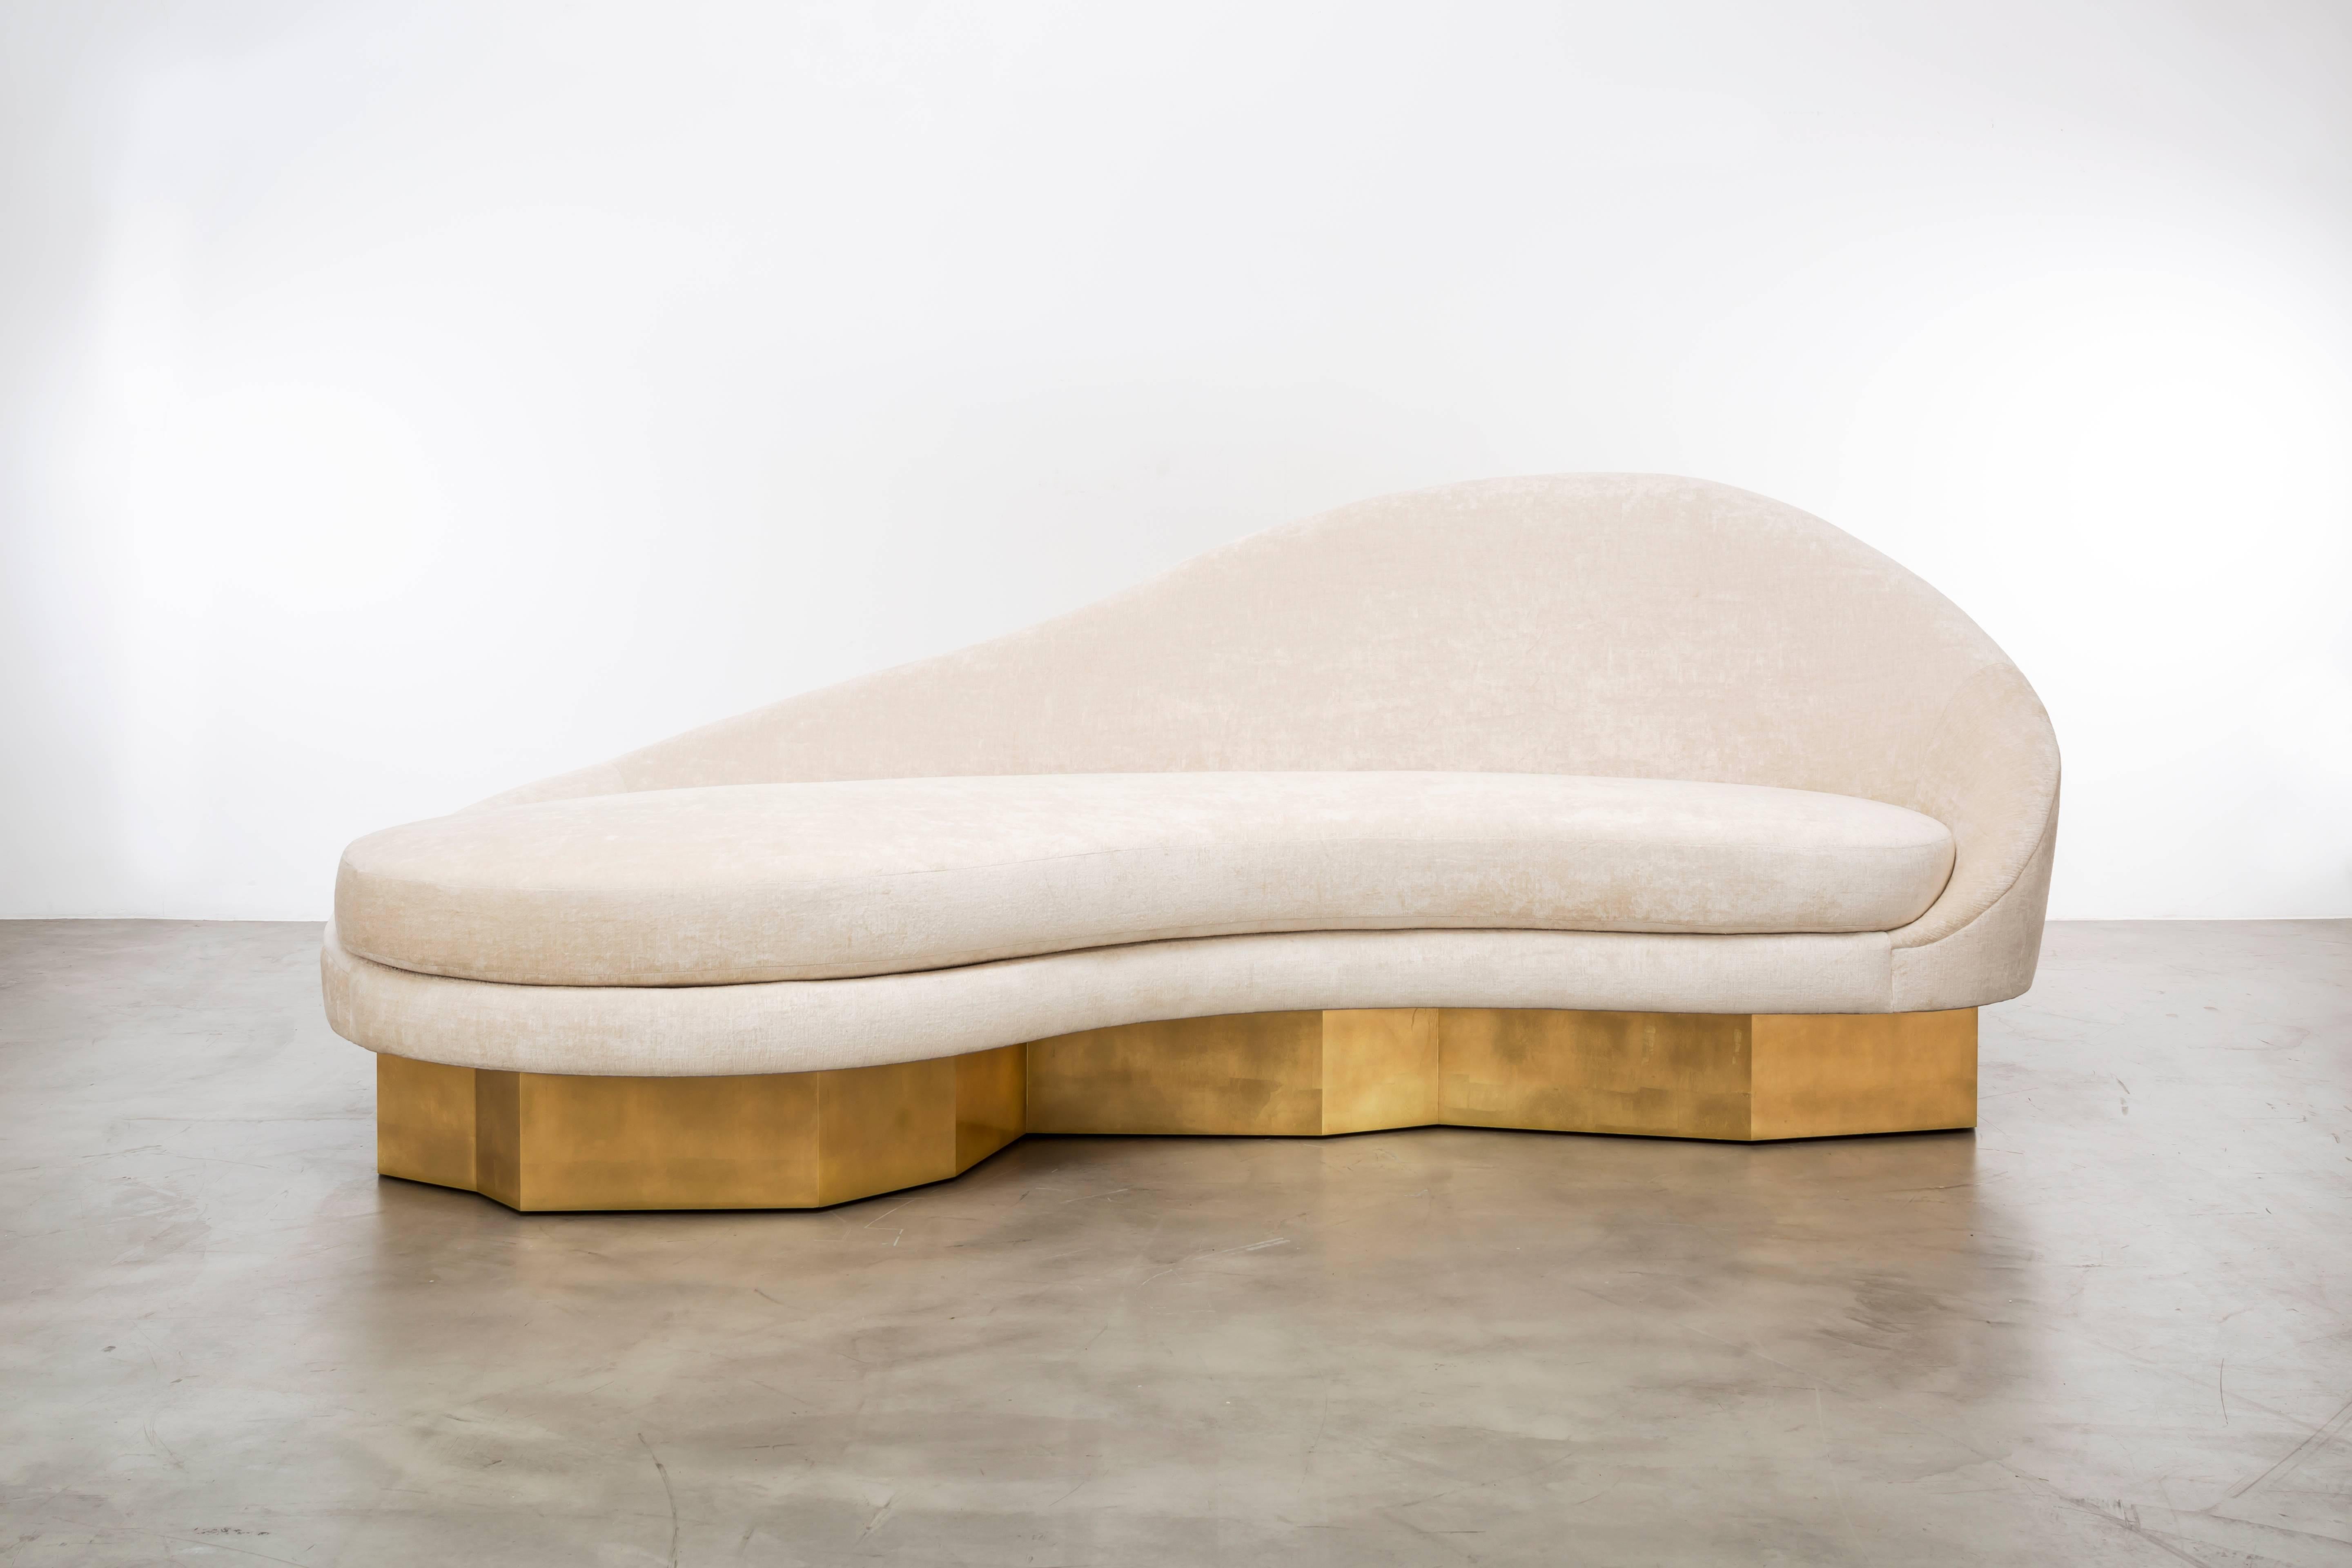 The Satine Sofa inspired by the curvature of Gaudi architecture features an asymmetrical sophisticated velvet slope that meets a fractured gold leaf plinth base to make a minimal and elegant statement.  Fully custom and made to order in California. 